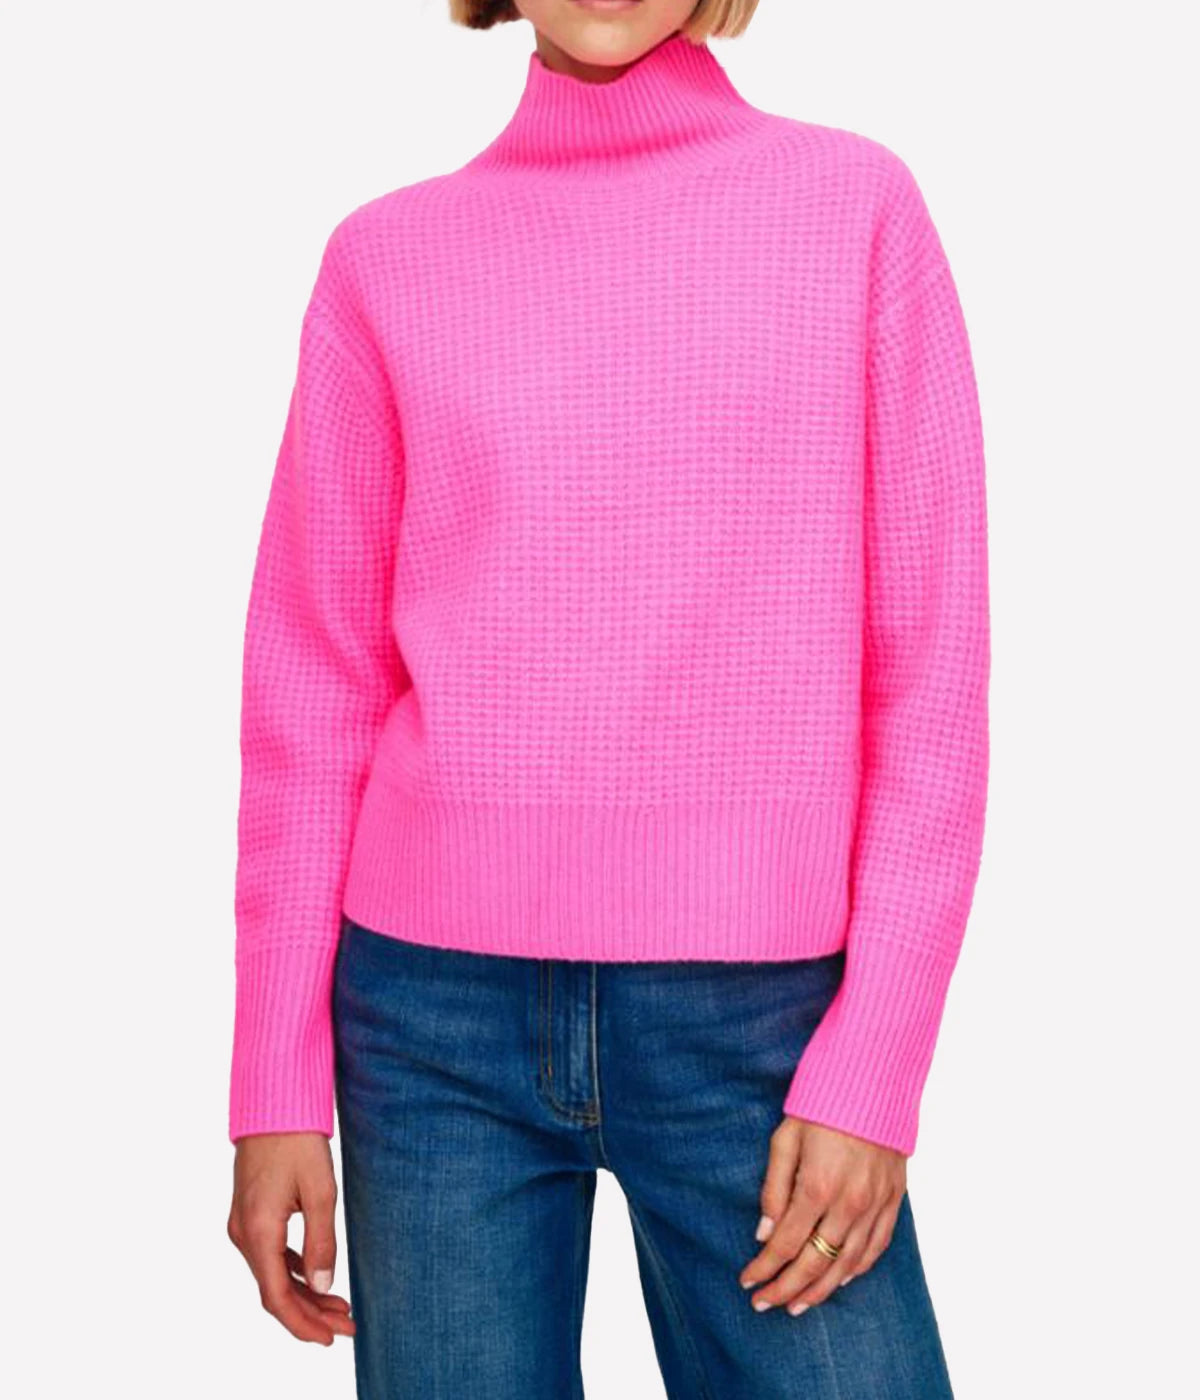 Cashmere Waffle Turtleneck in Pink Glow